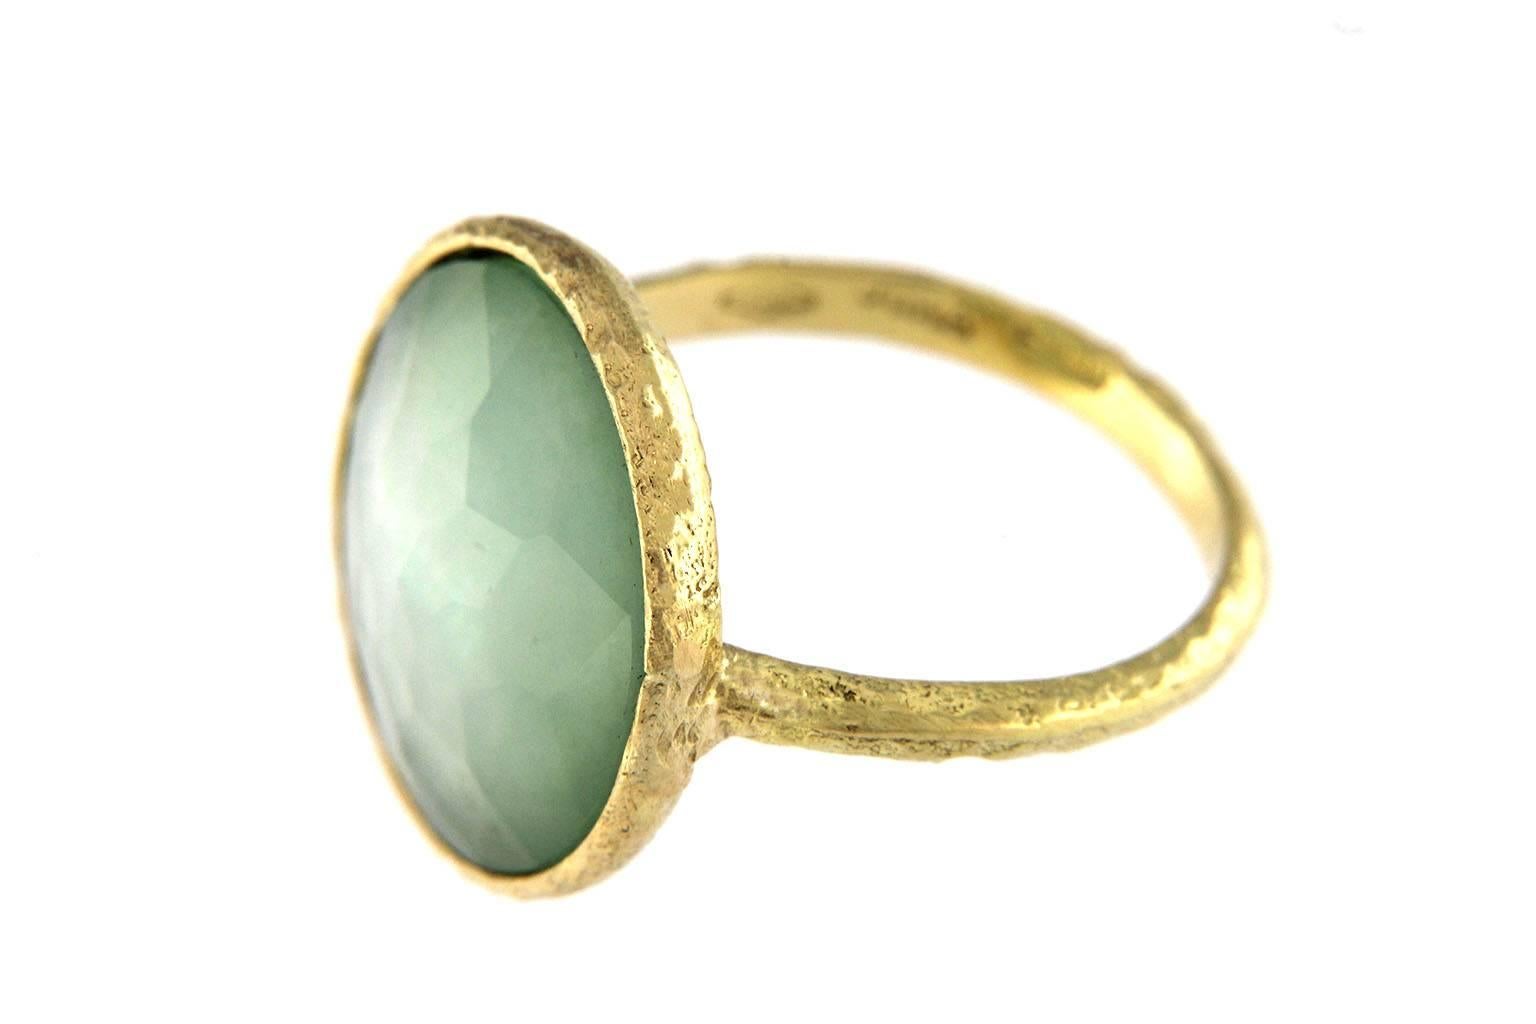 Jona design collection, hand crafted in Italy, 18 Karat yellow gold ring set with a crazy cut quartz over Chrysoprase and mother of pearl, weighing 7.18 carats. 
Size US 6.5, can be sized to any specification
All Jona jewelry is new and has never